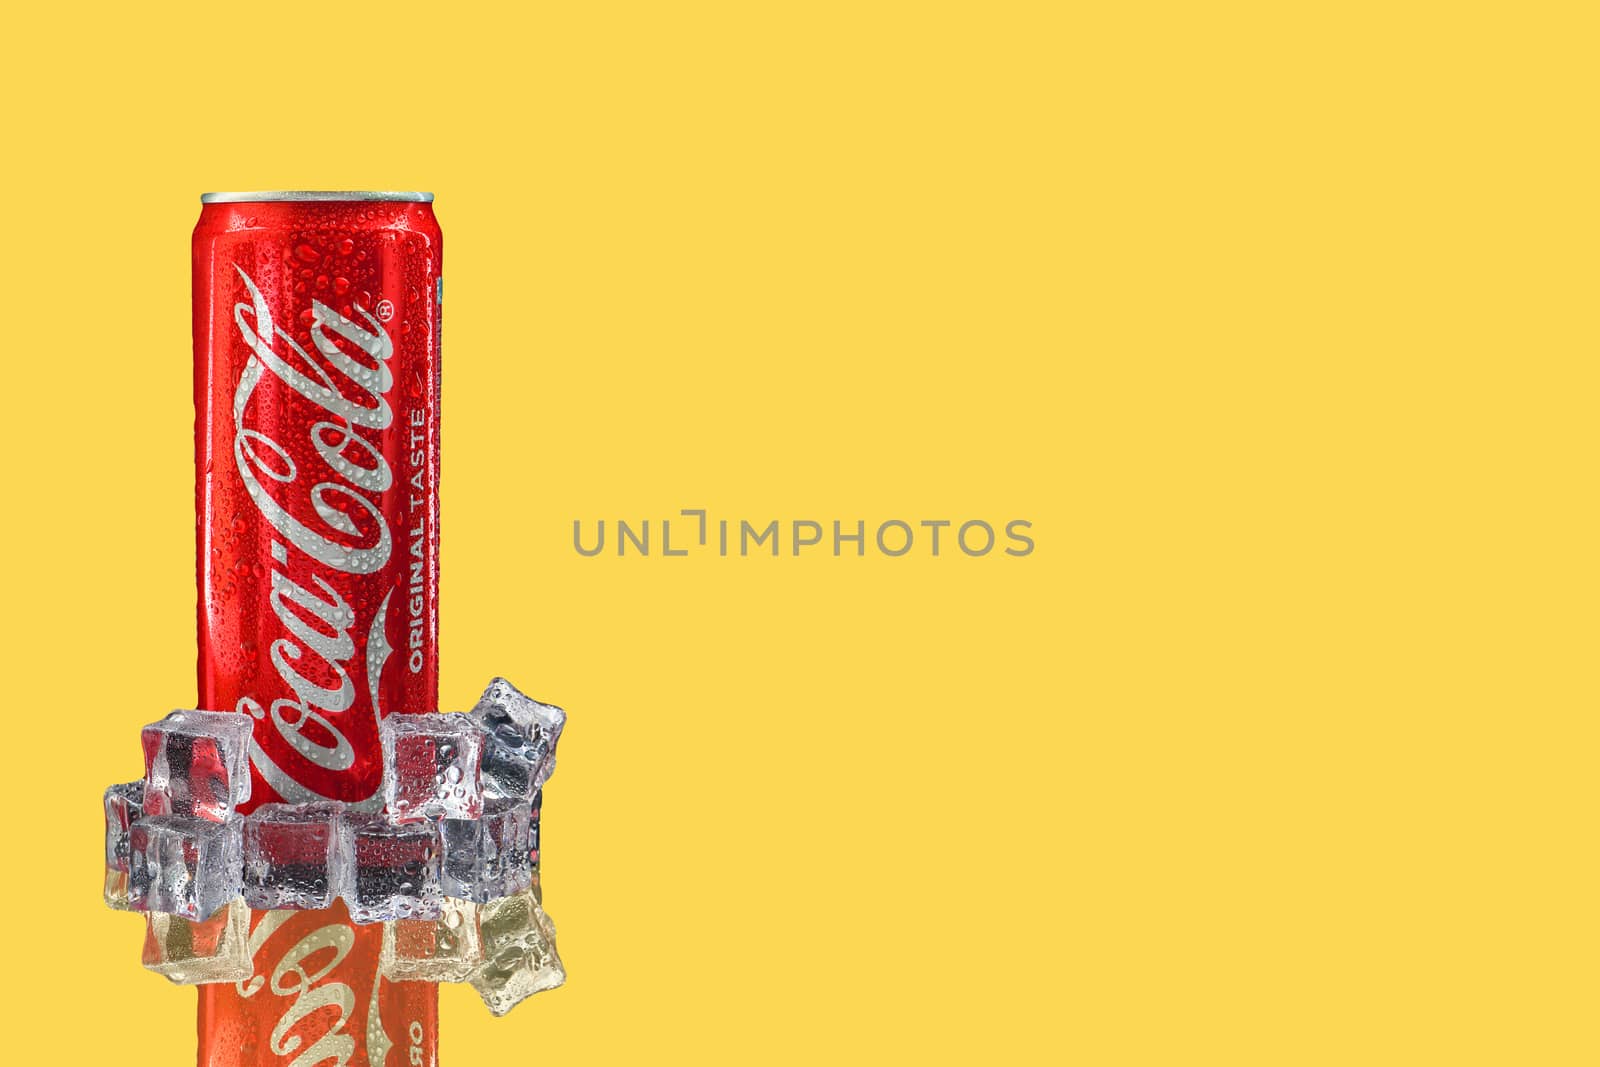 Kuala Lumpur, Malaysia - October 19, 2020 : Coca Cola or Coke Drink on yellow background by silverwings